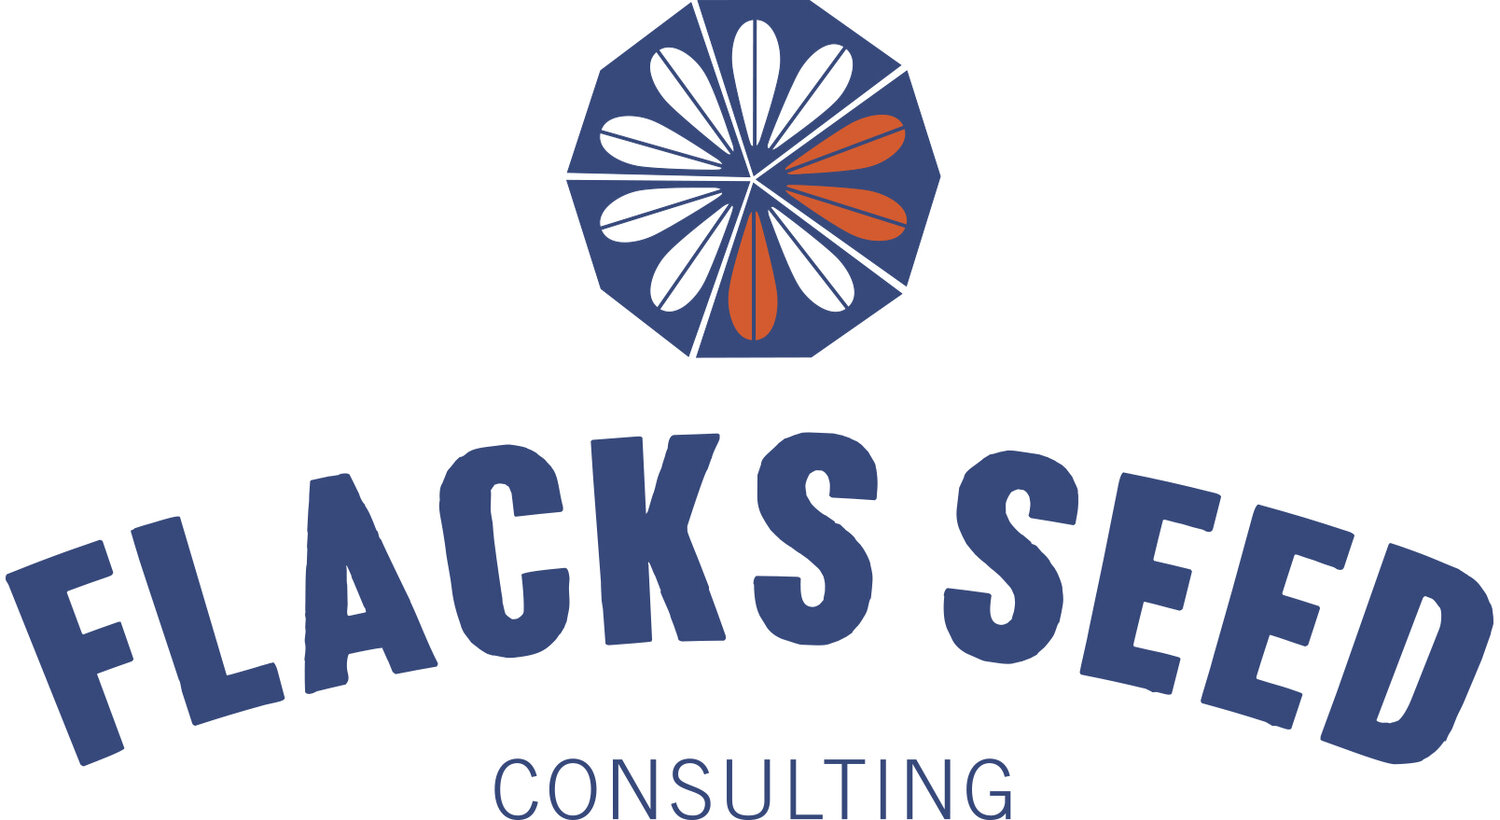 Flacks Seed Consulting